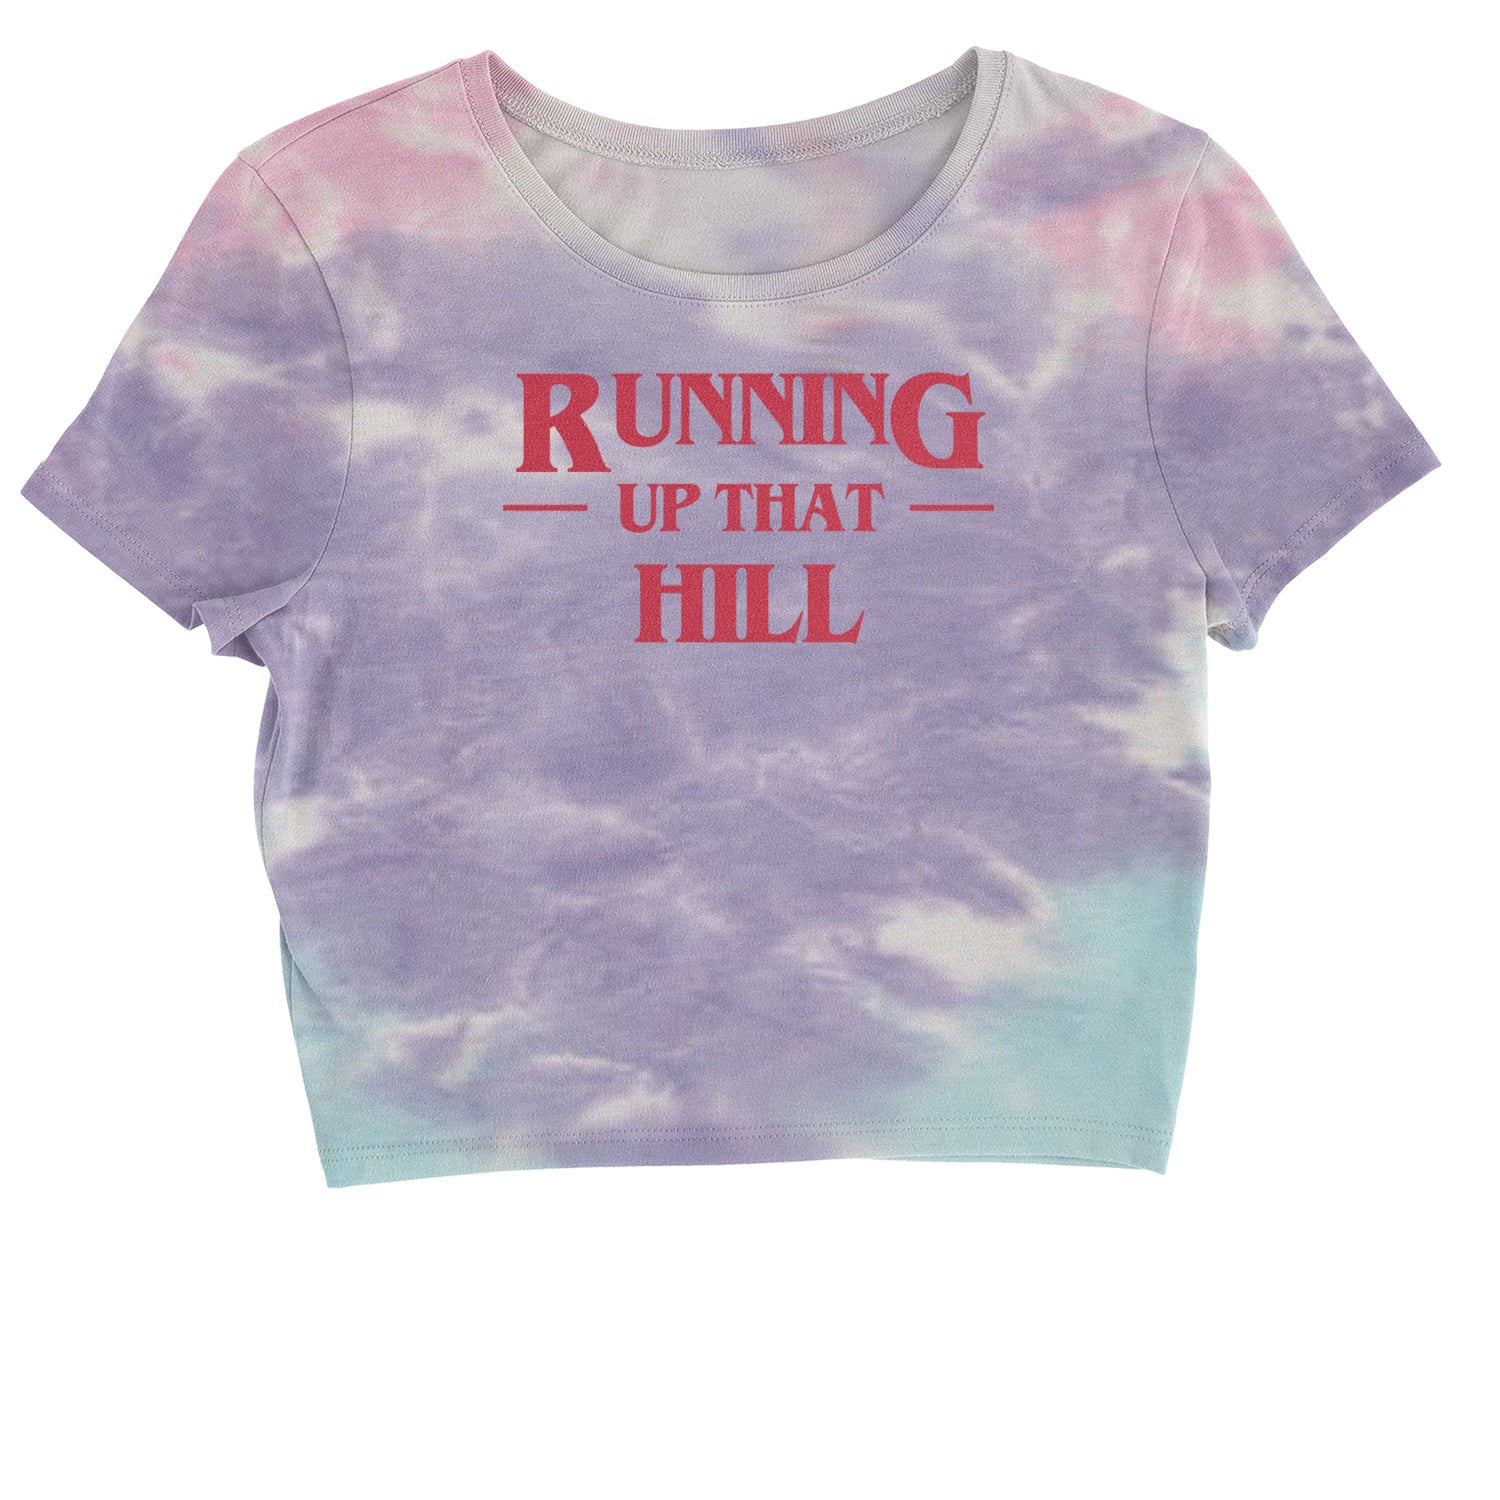 Running Up That Hill Cropped T-Shirt 4, don’t, eleven, four, friends, lie, season by Expression Tees